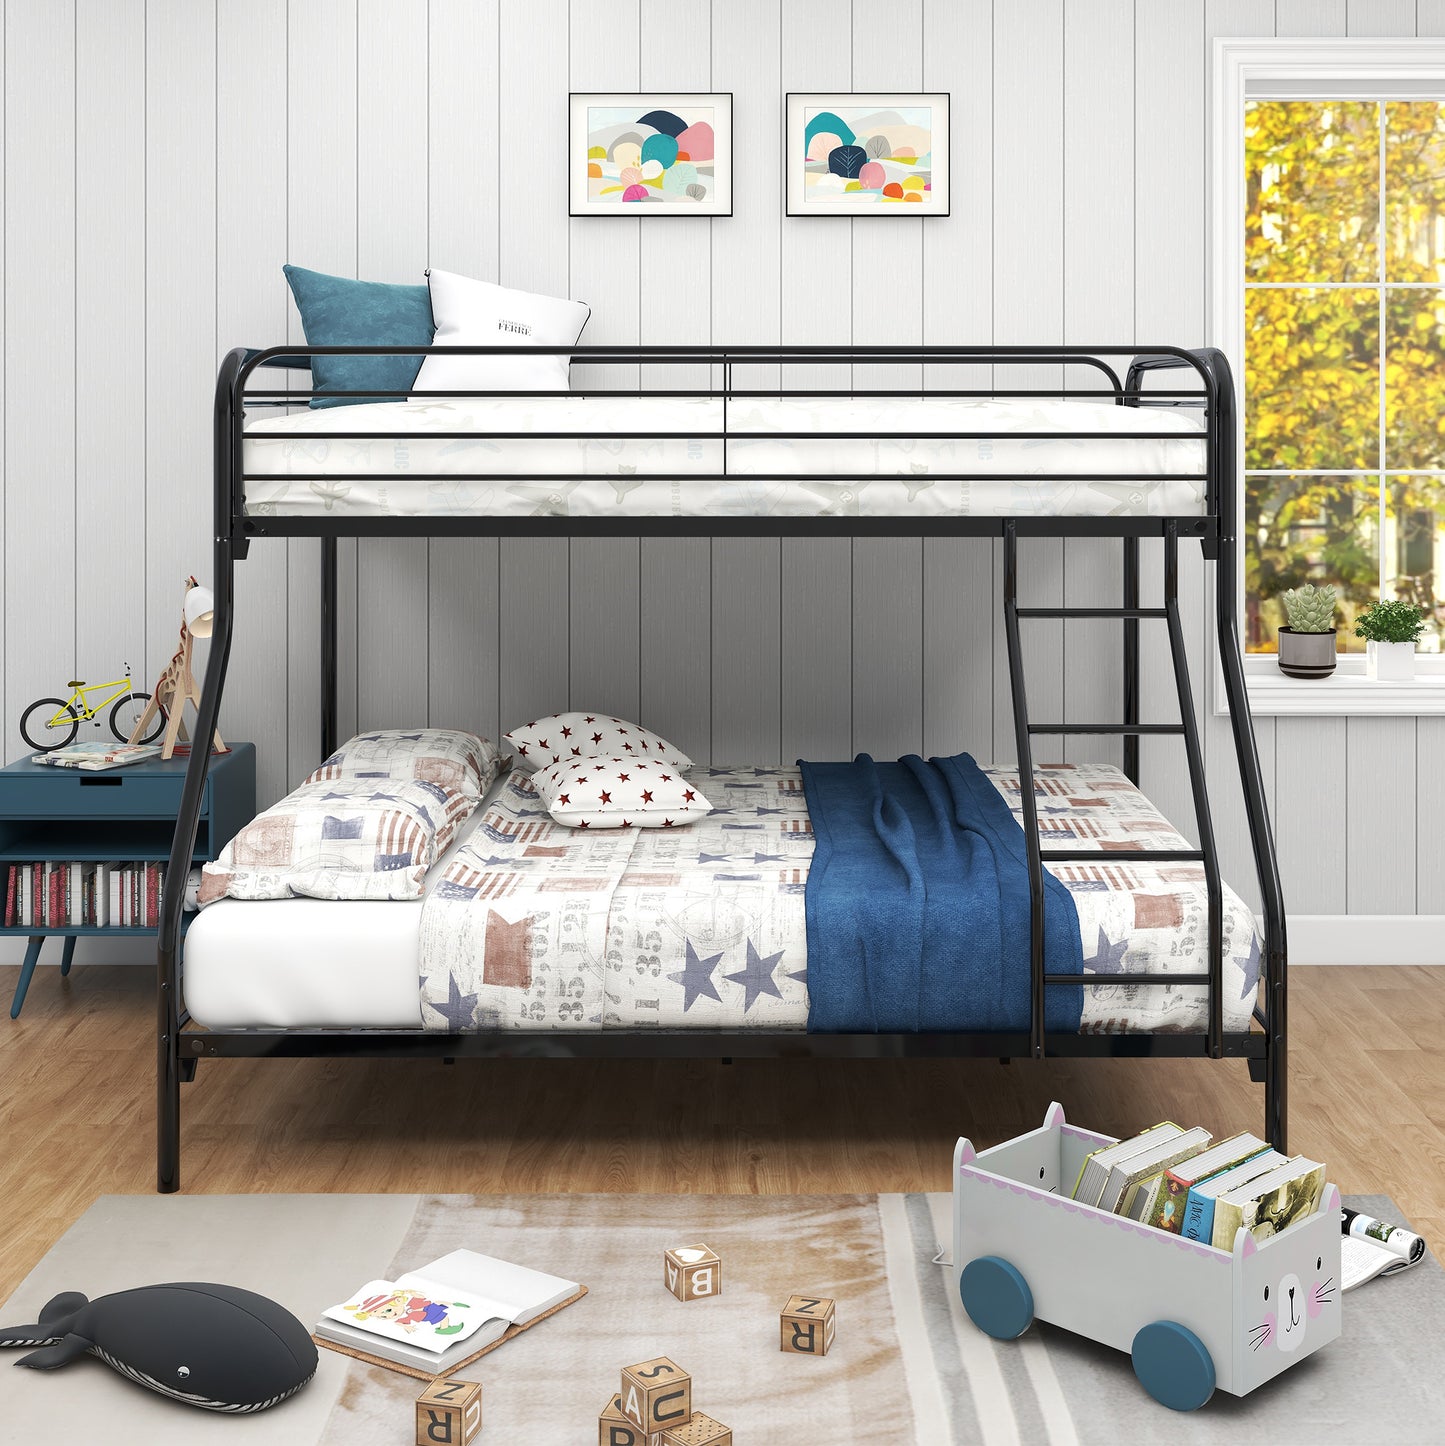 Metal Bunk Bed, Twin Over Full Bed with Ladder & Safety Guardrail, for Kids/Teens/Adults, Space Saving Kid's Room Bed Frame, No Spring Box Needed, Black, A1242